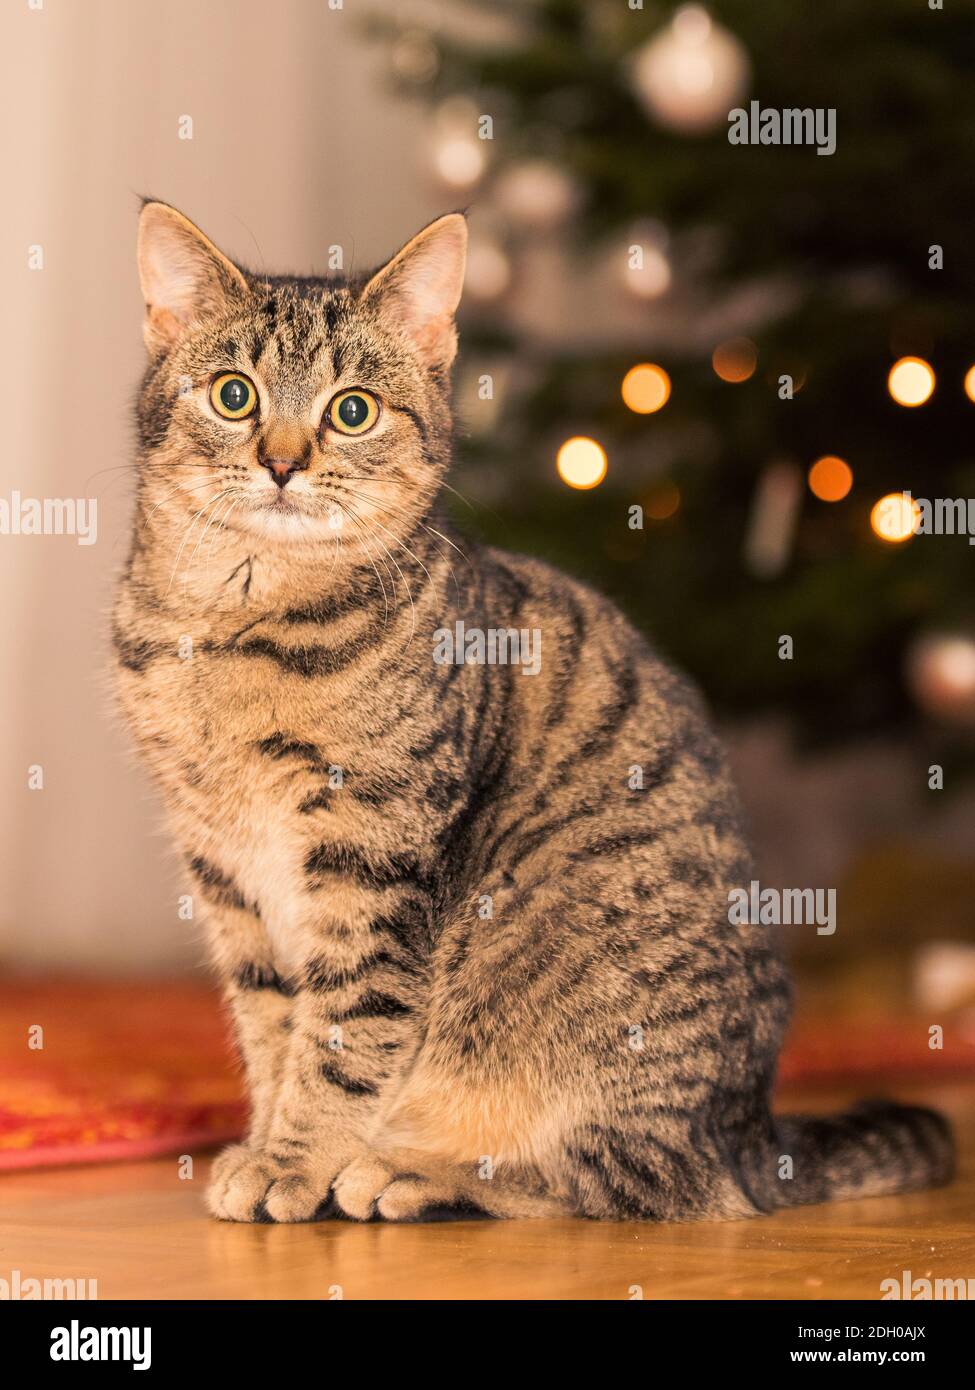 Brown striped tabby cat sitting on floor in living room with blurred decorated christmas tree in background Stock Photo